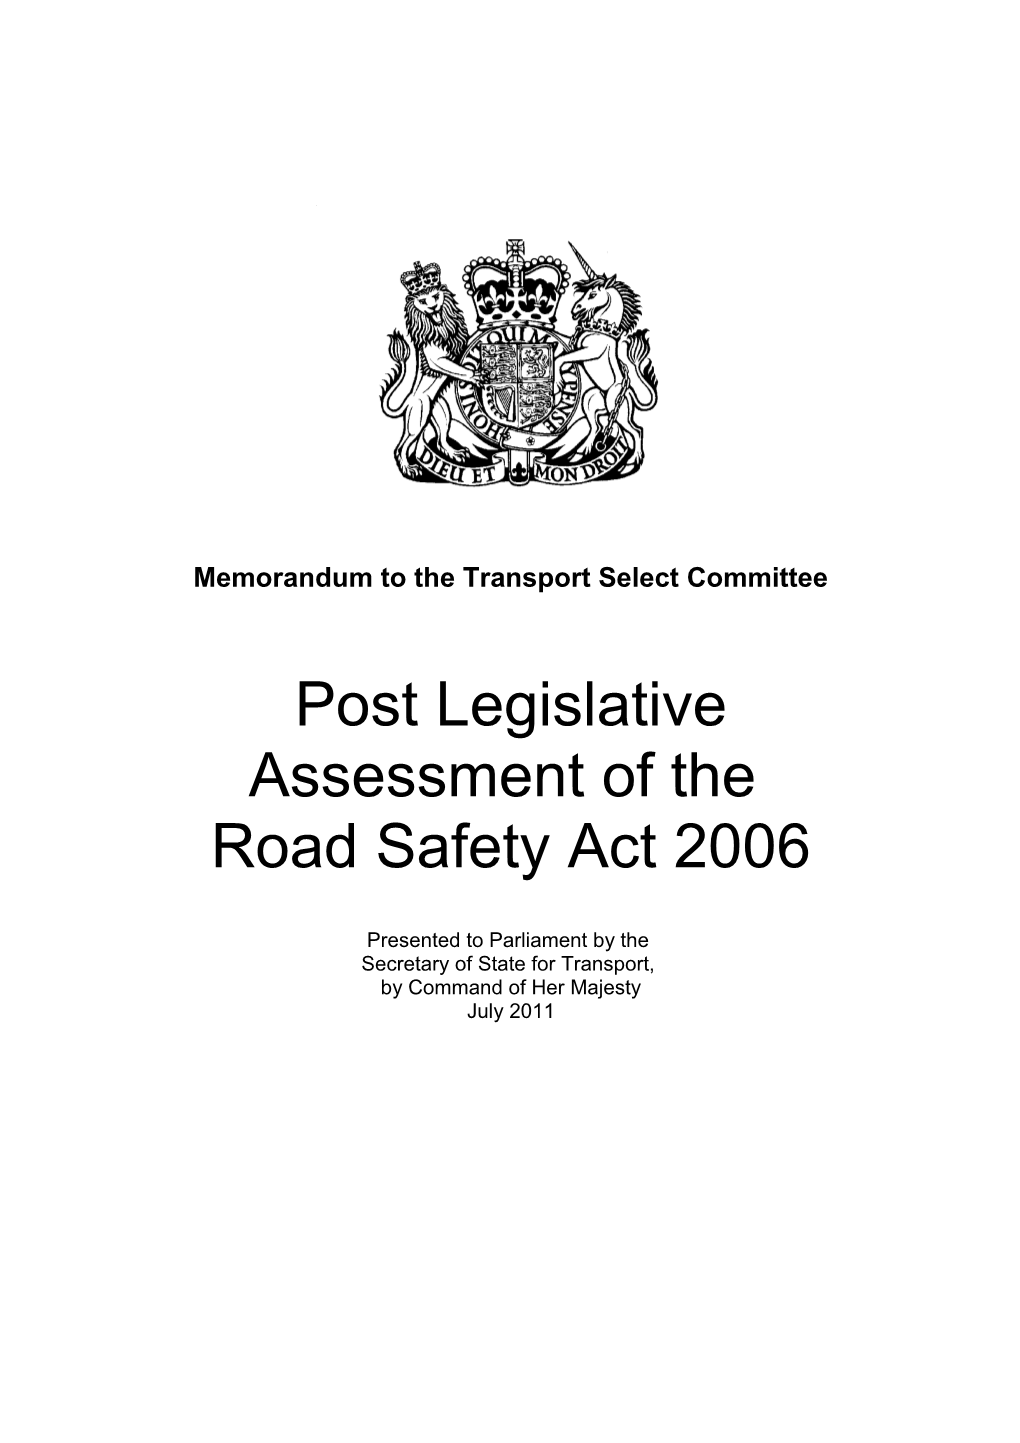 Memorandum to the the Transport Select Committee - Road Safety Act 2006 Post Legislative